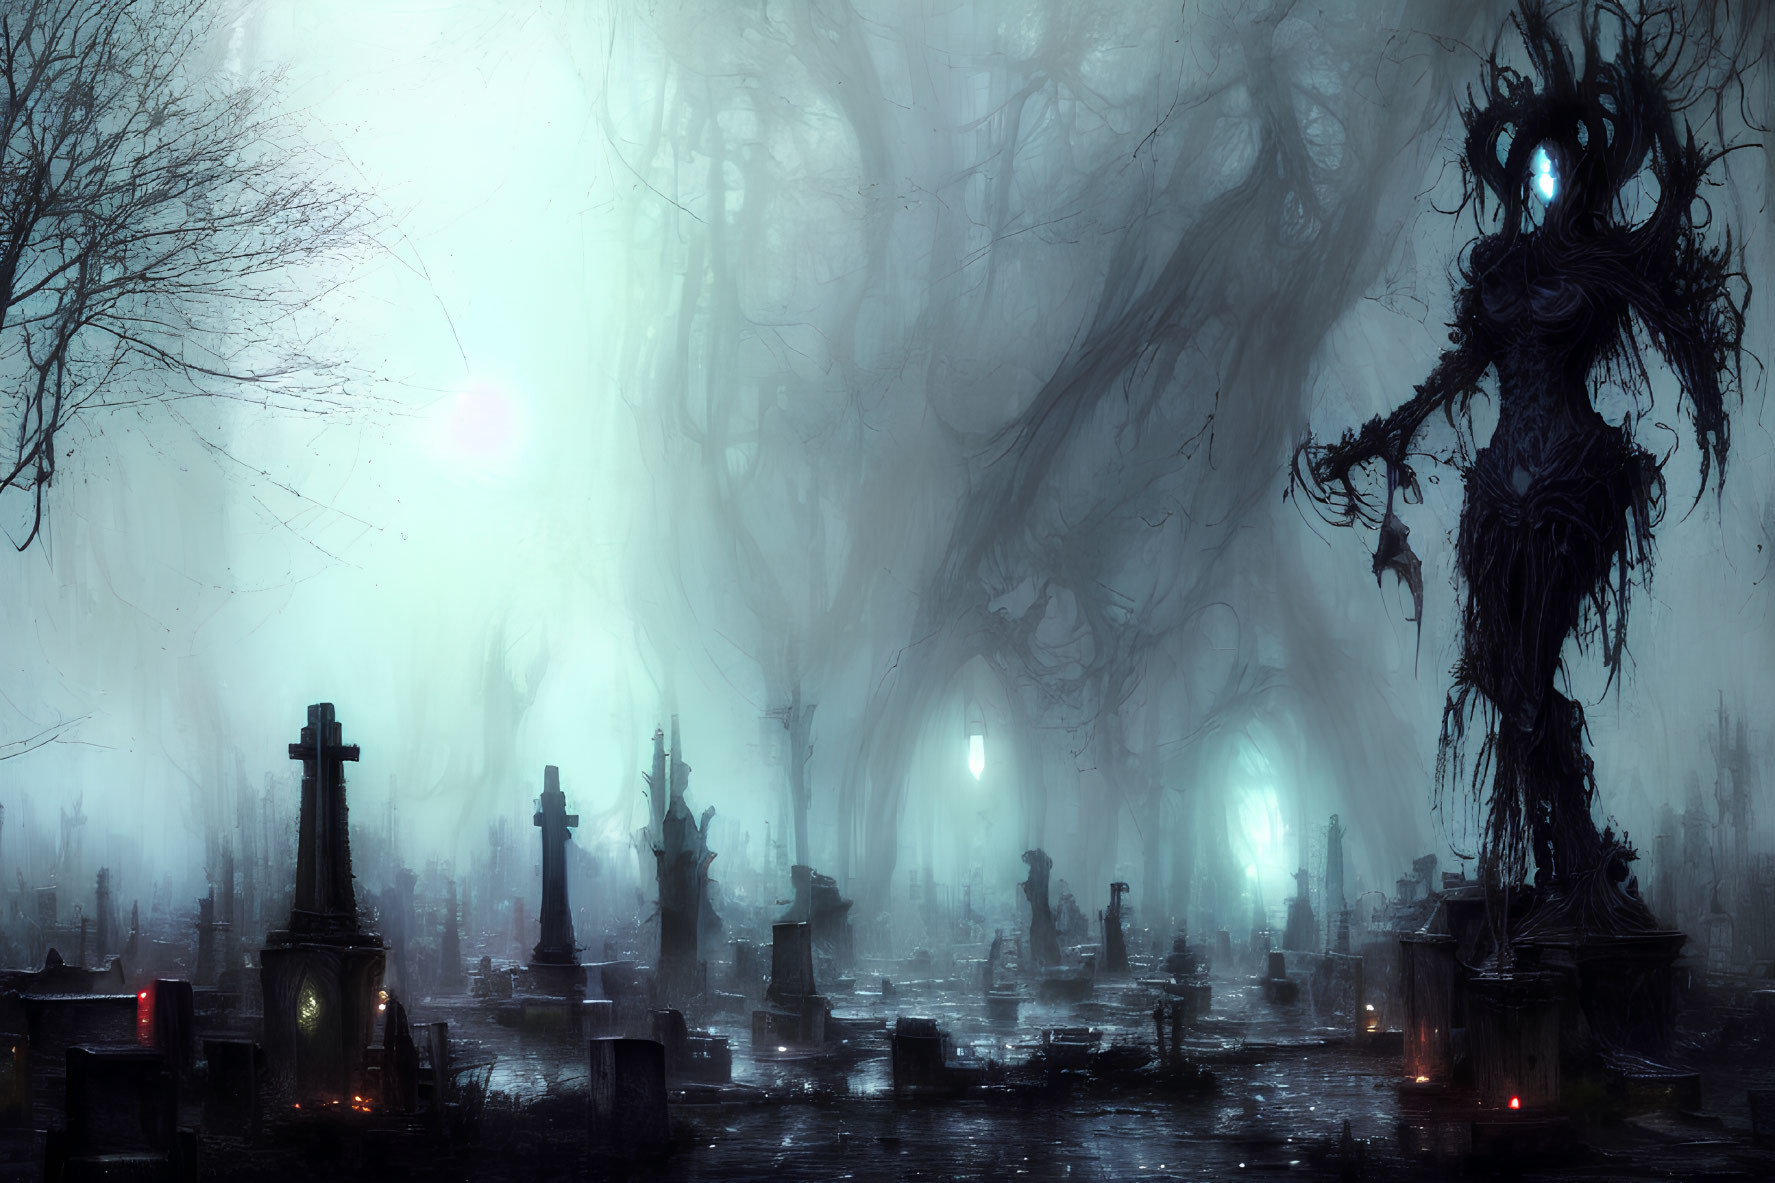 Spooky graveyard scene with mist, twisted trees, and spectral figure